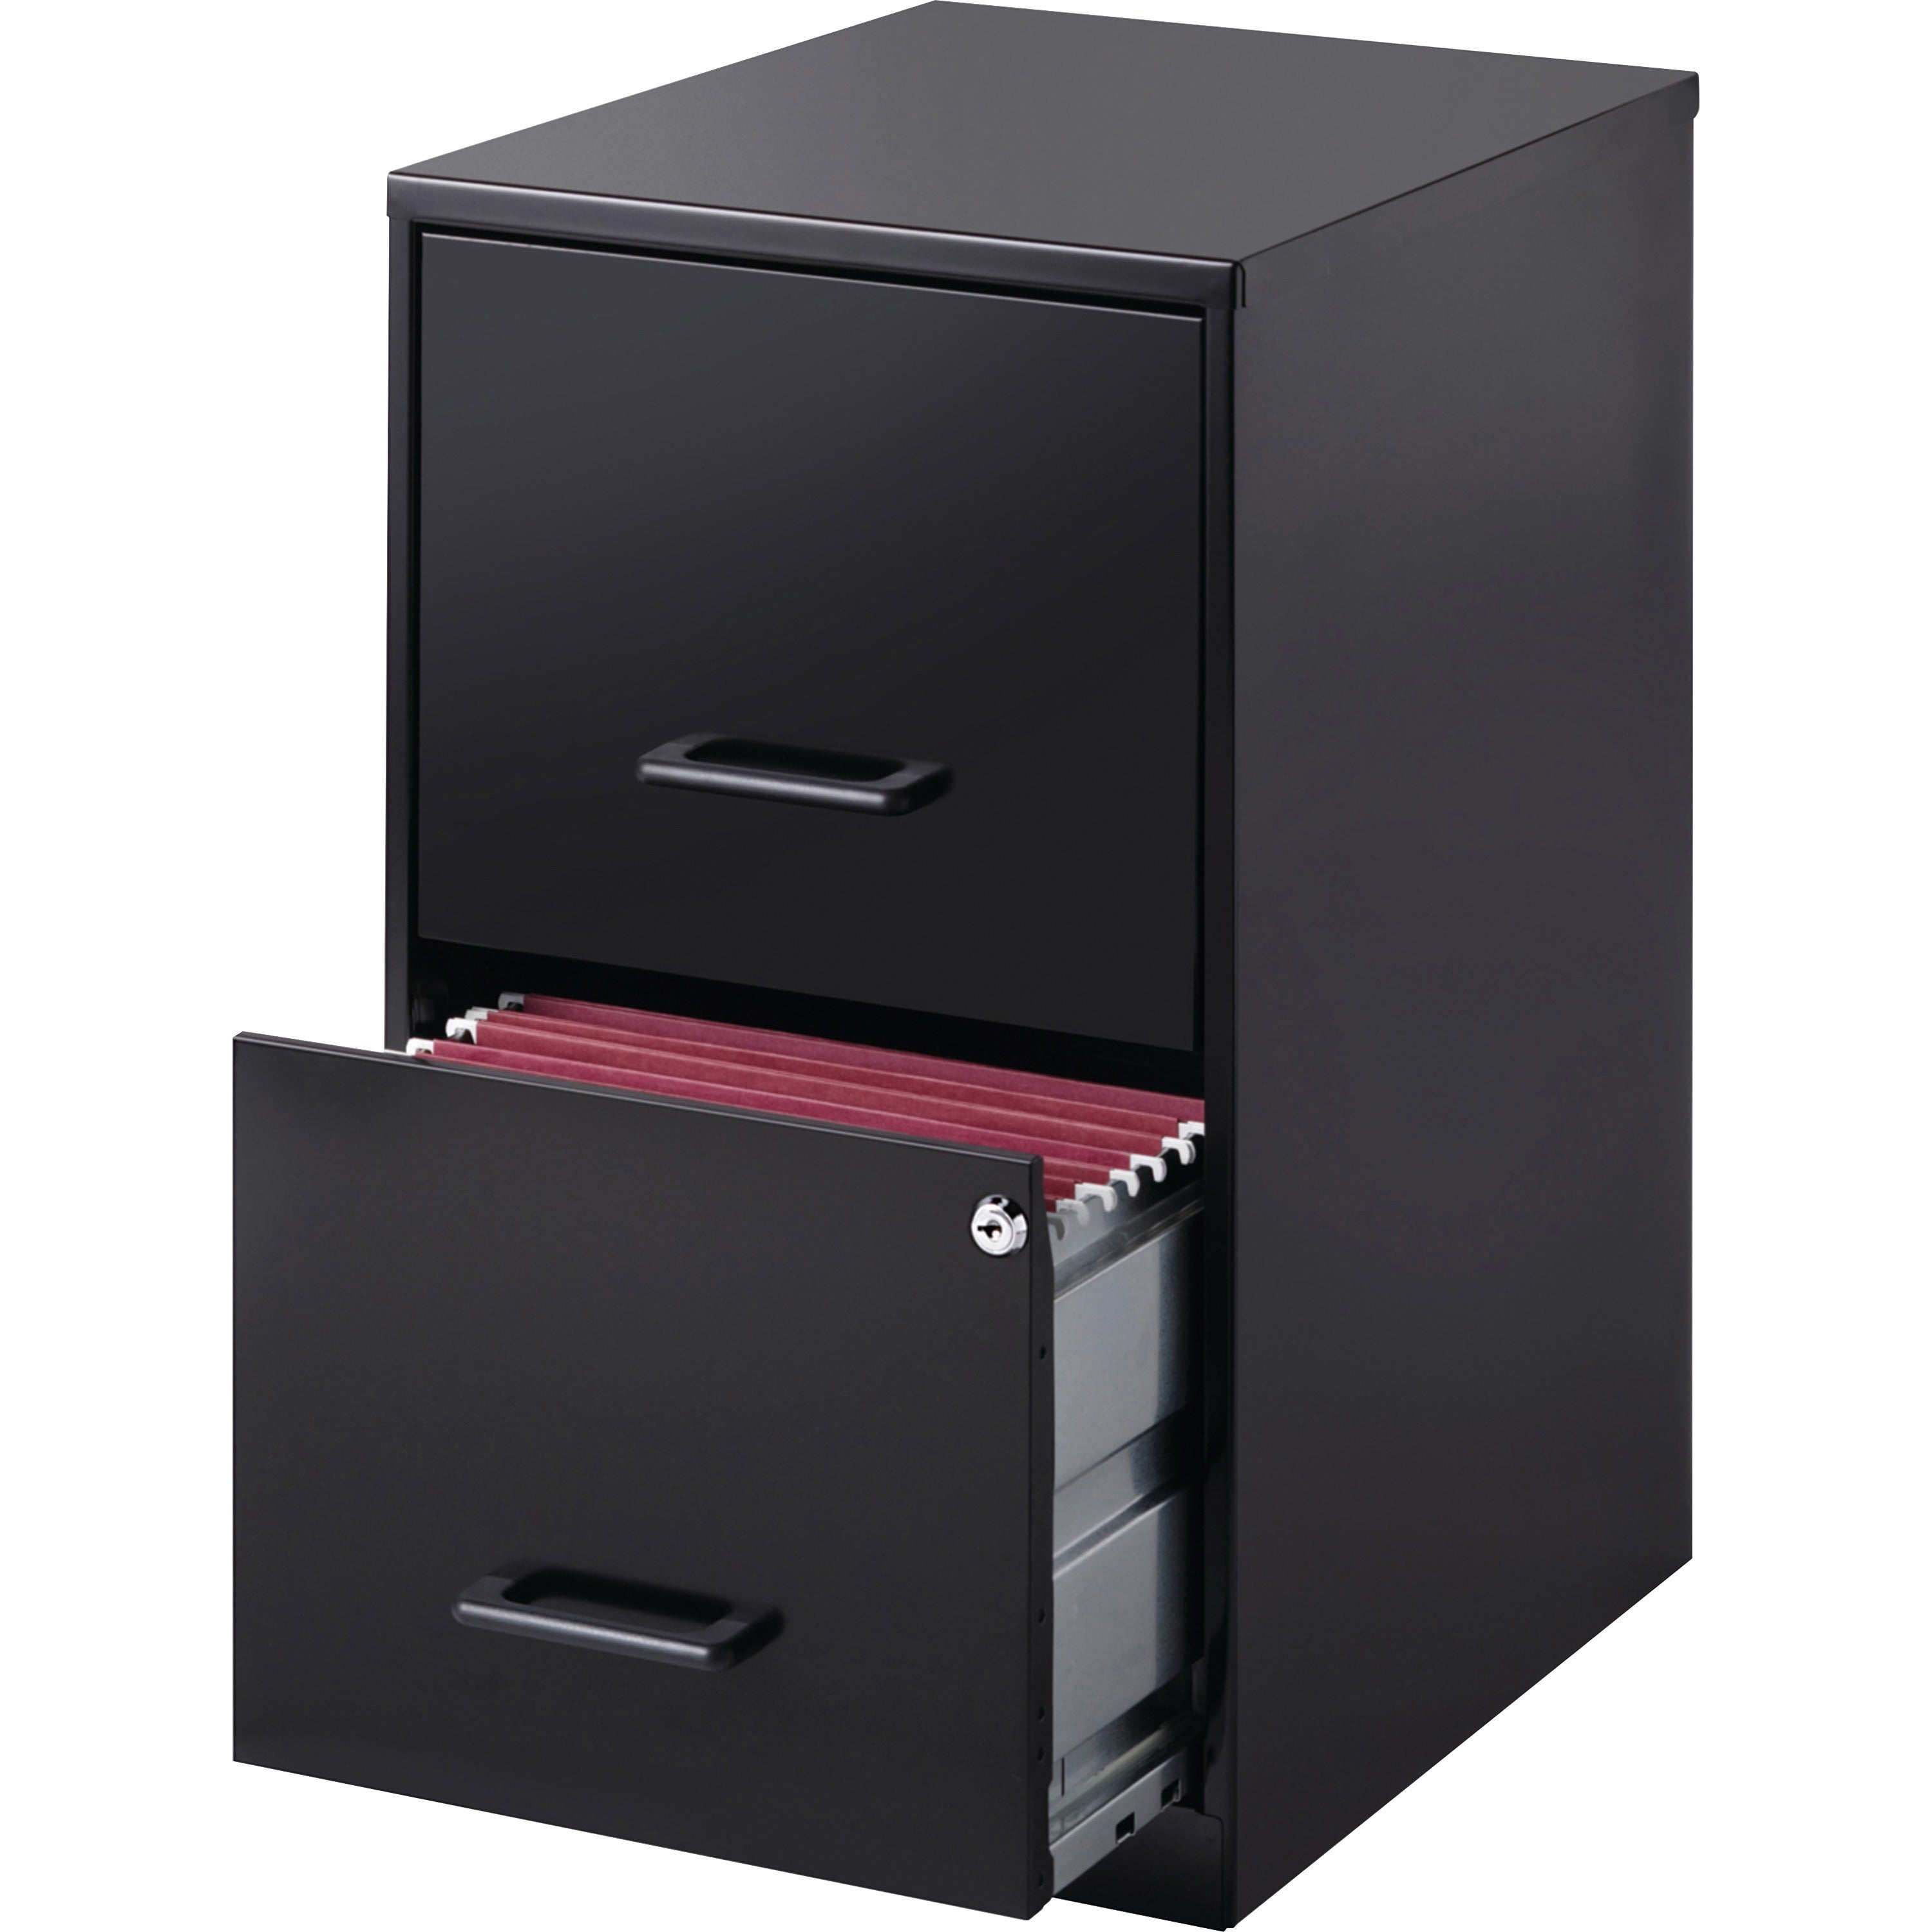 nusparc-file-cabinet-142-x-18-x-245-2-x-drawers-for-file-letter-vertical-locking-drawer-glide-suspension-nonporous-surface-black-baked-enamel-steel-recycled_nprvf218aabk - 3